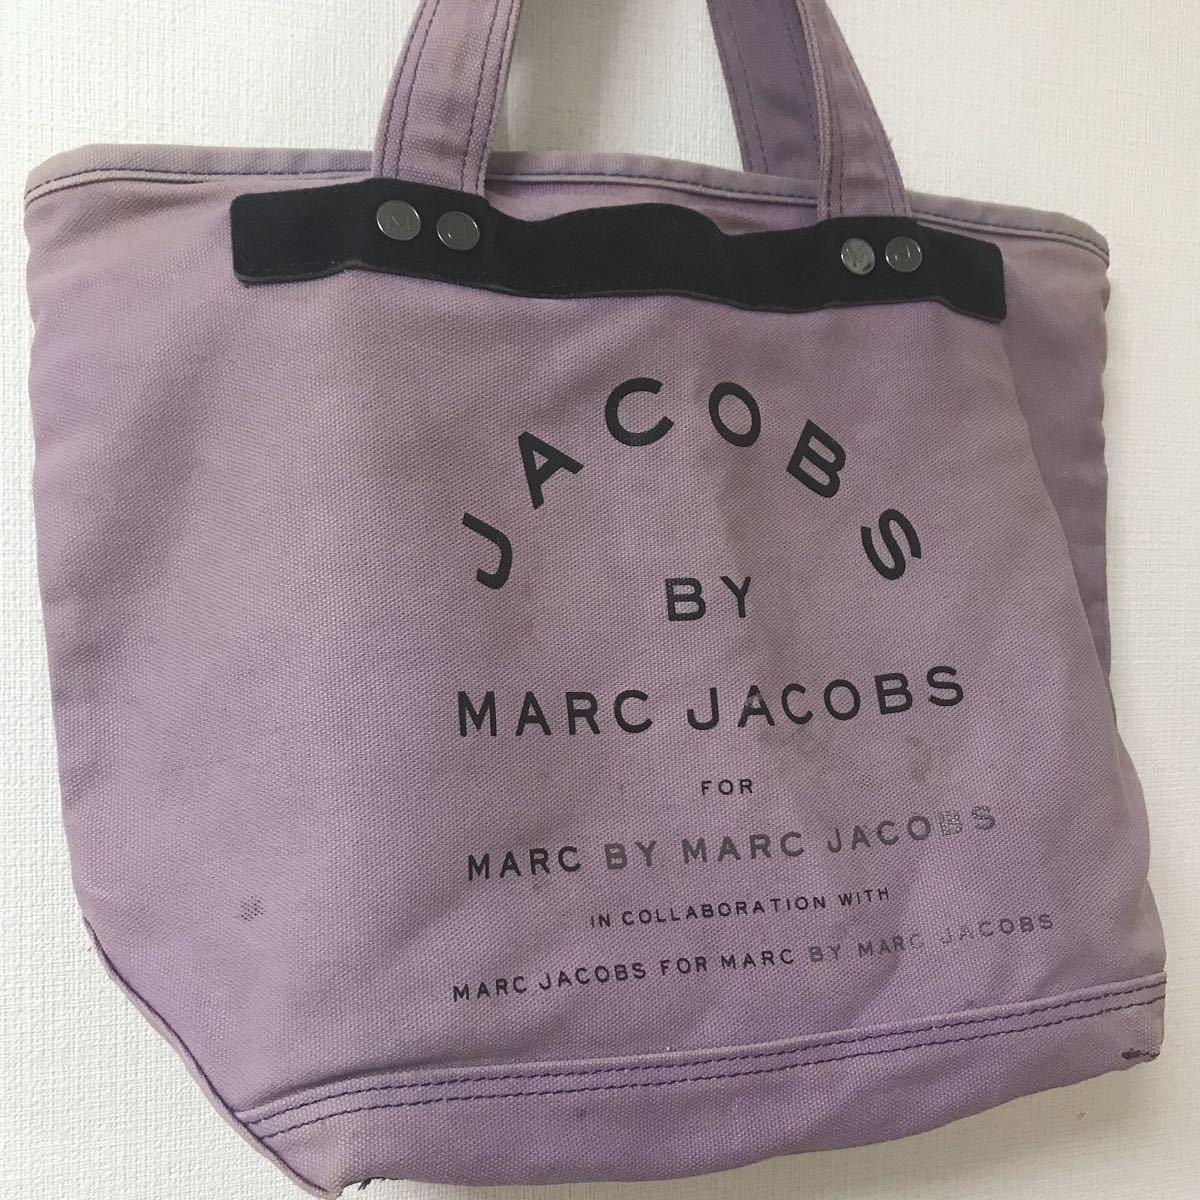 MARC BY MARC JACOBS マークバイマークジェイコブス トートバッグ MARC JACOBS マークジェイコブス